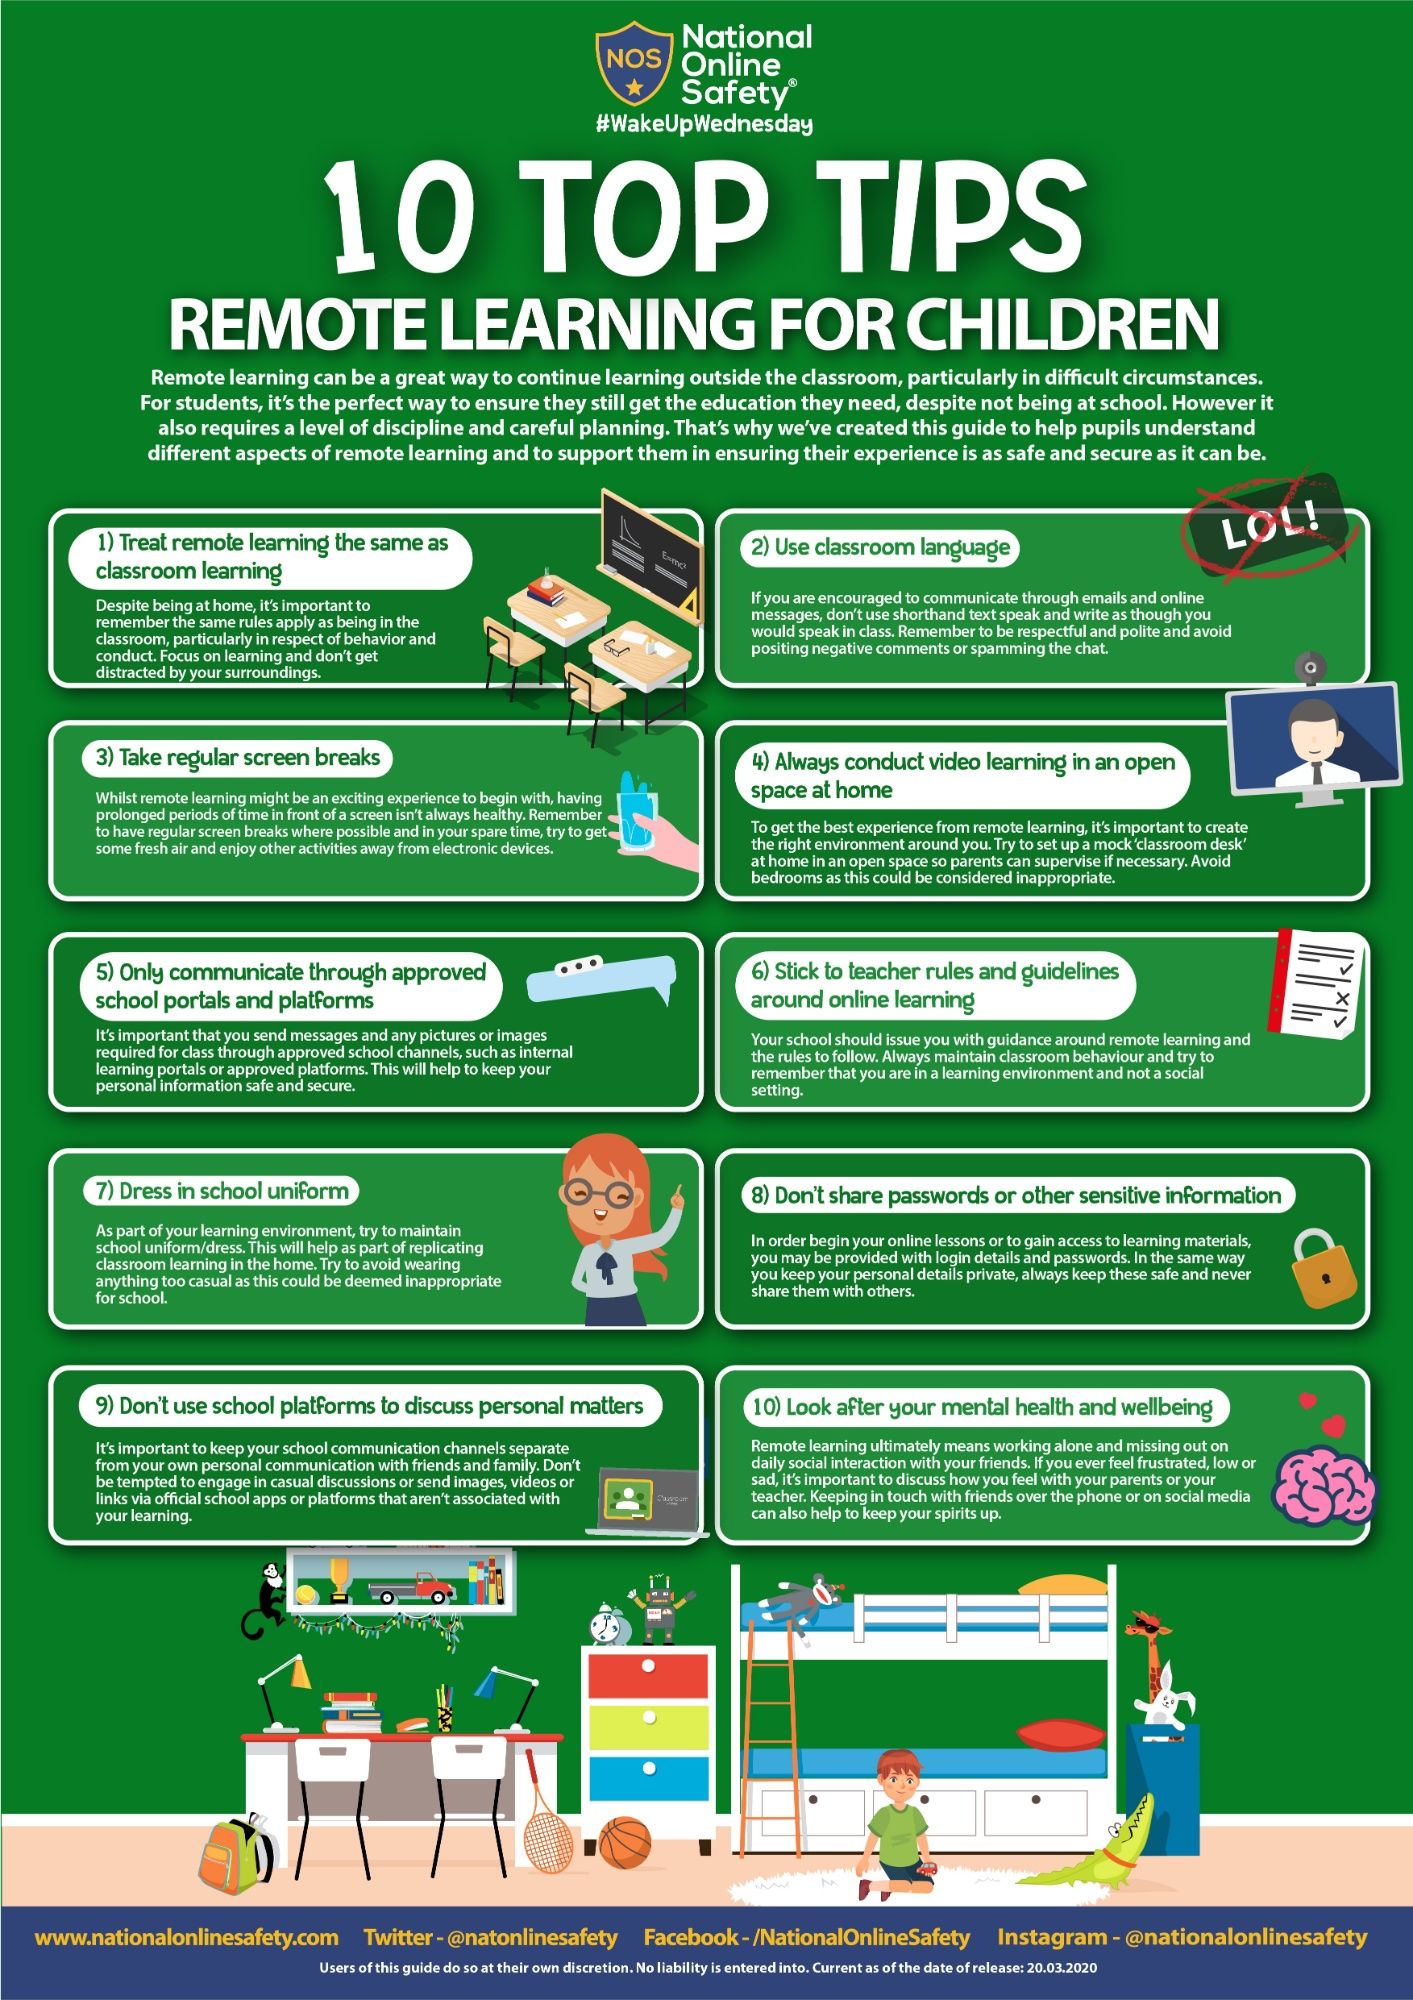 Online Safety during remote learning